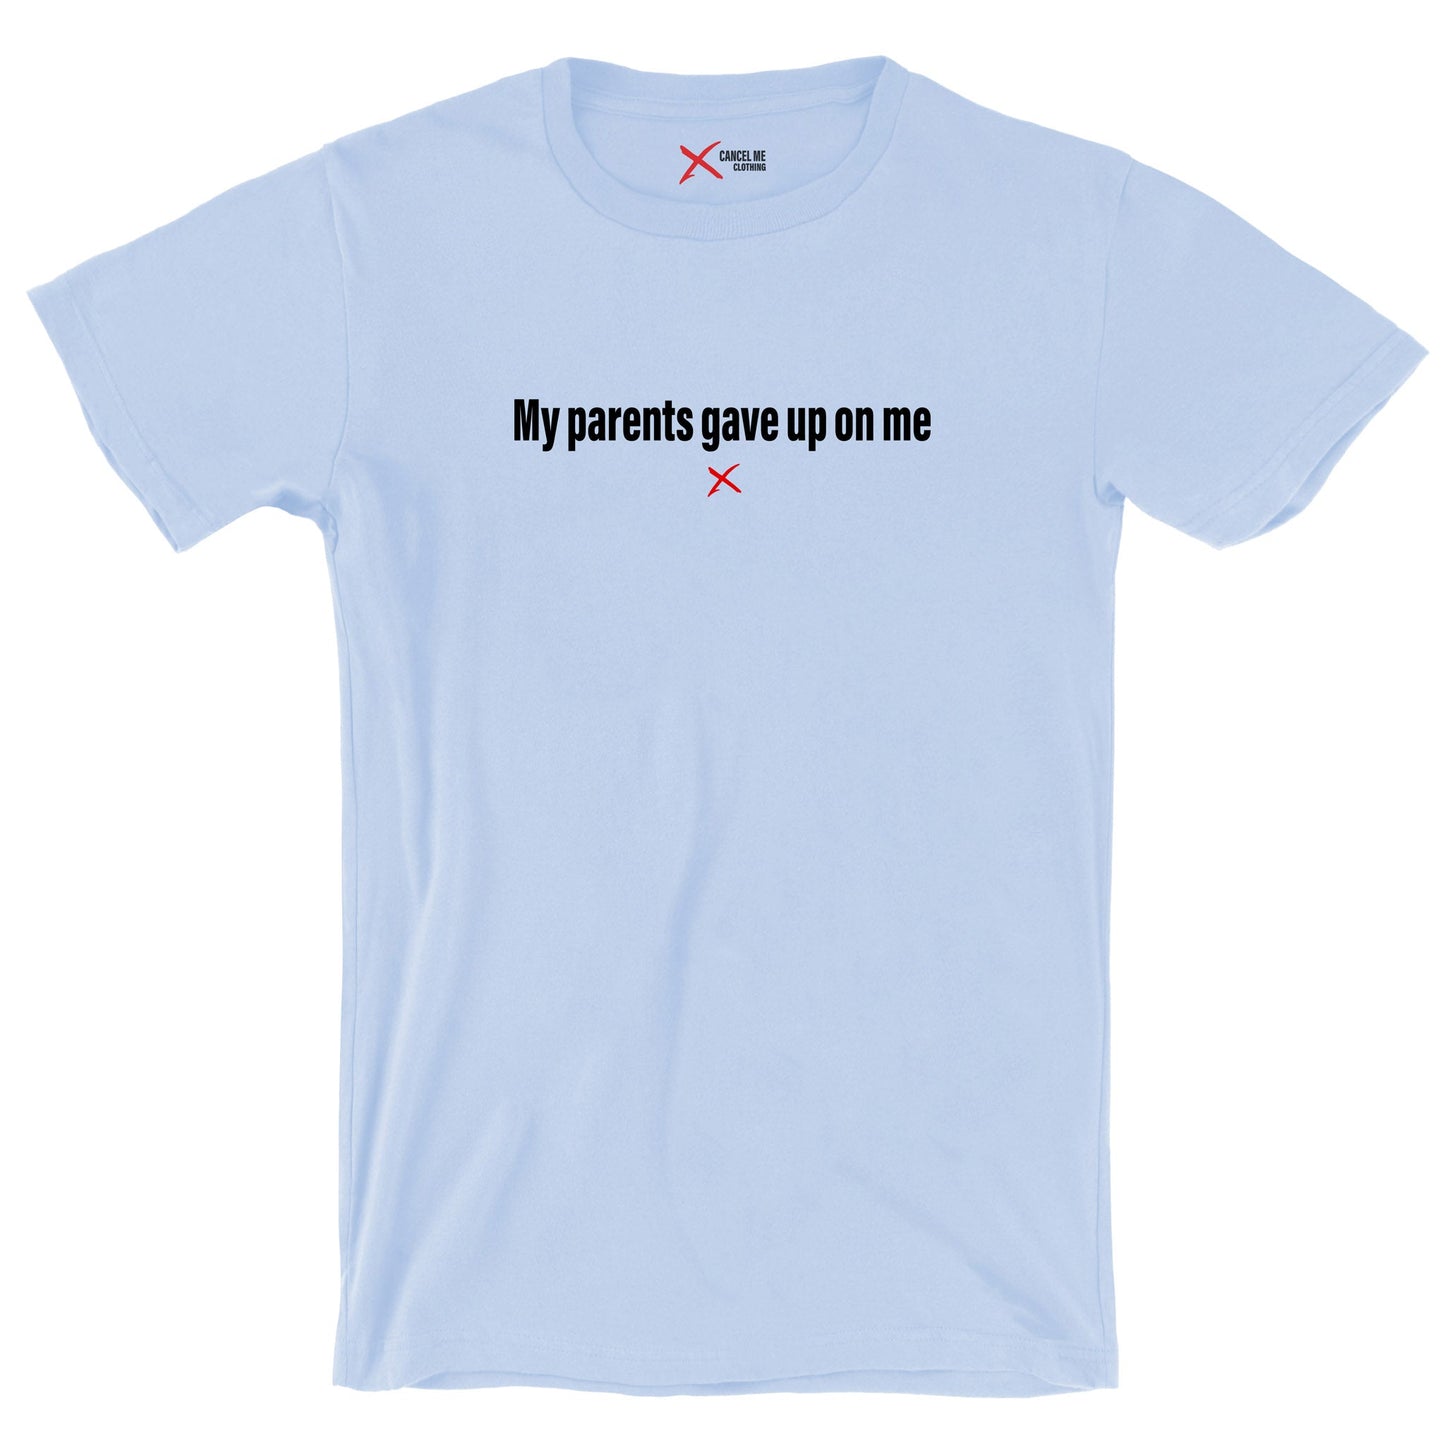 My parents gave up on me - Shirt